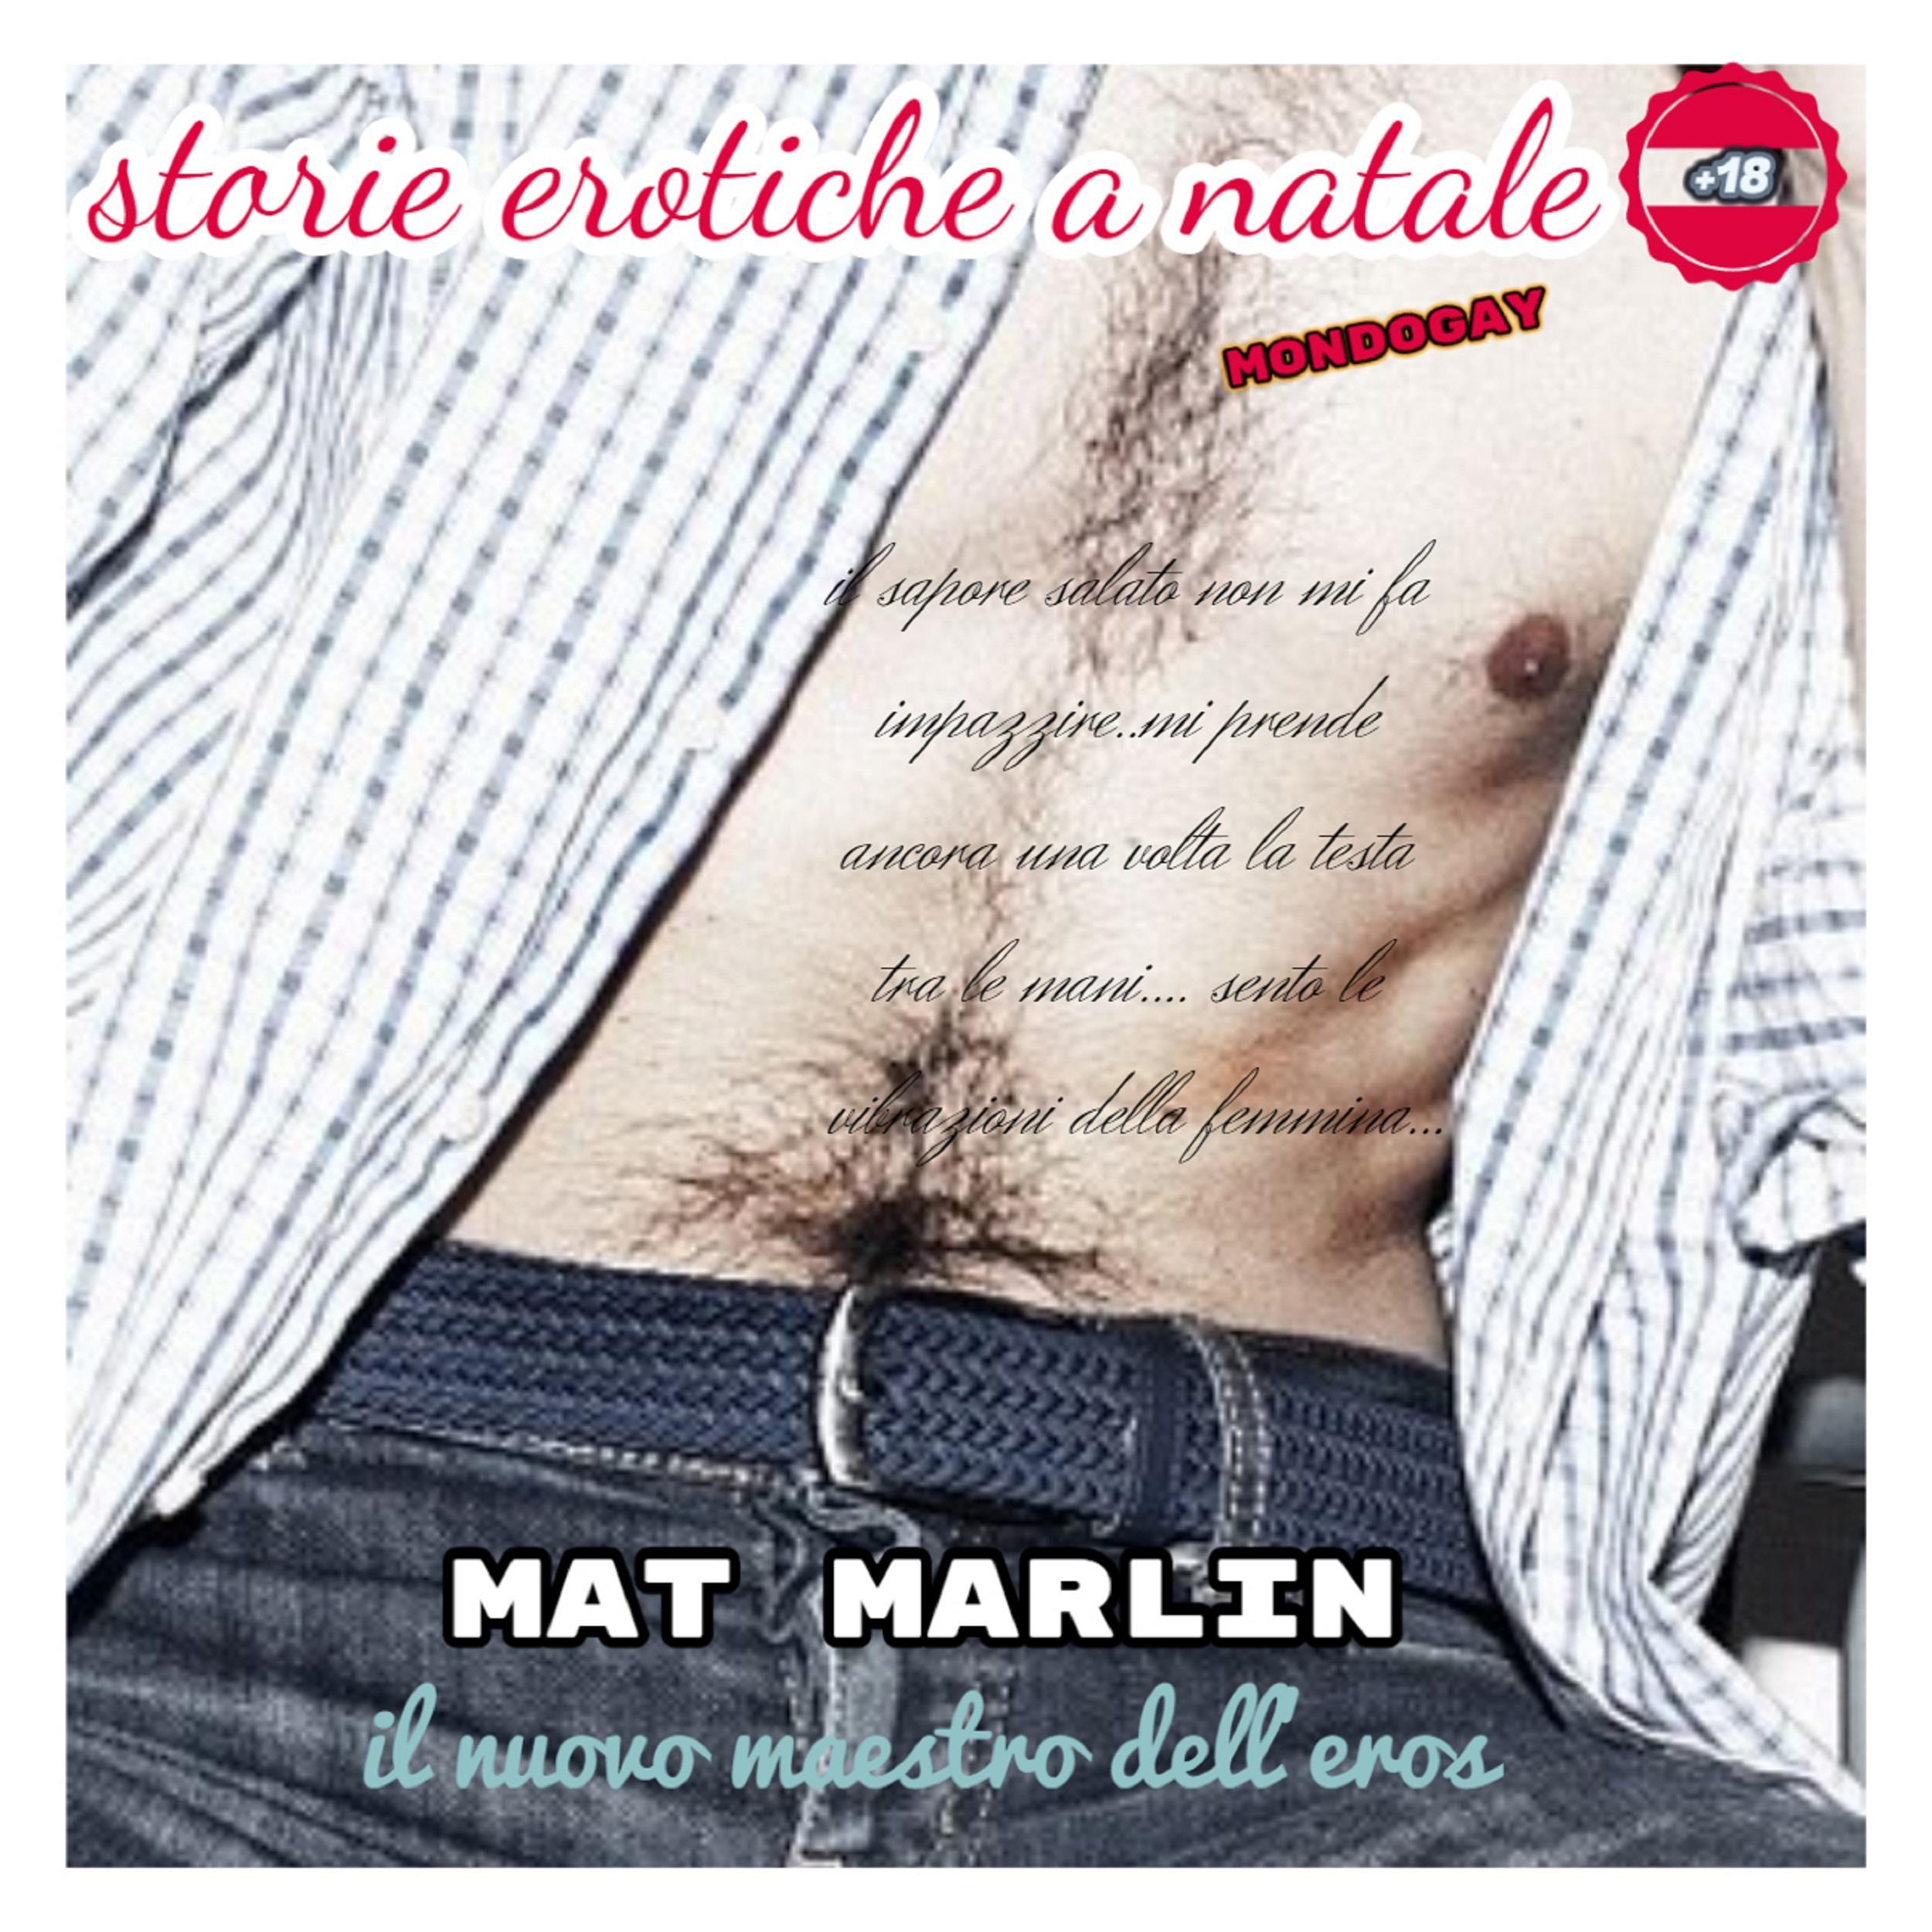 Storie erotiche a Natale (gay)